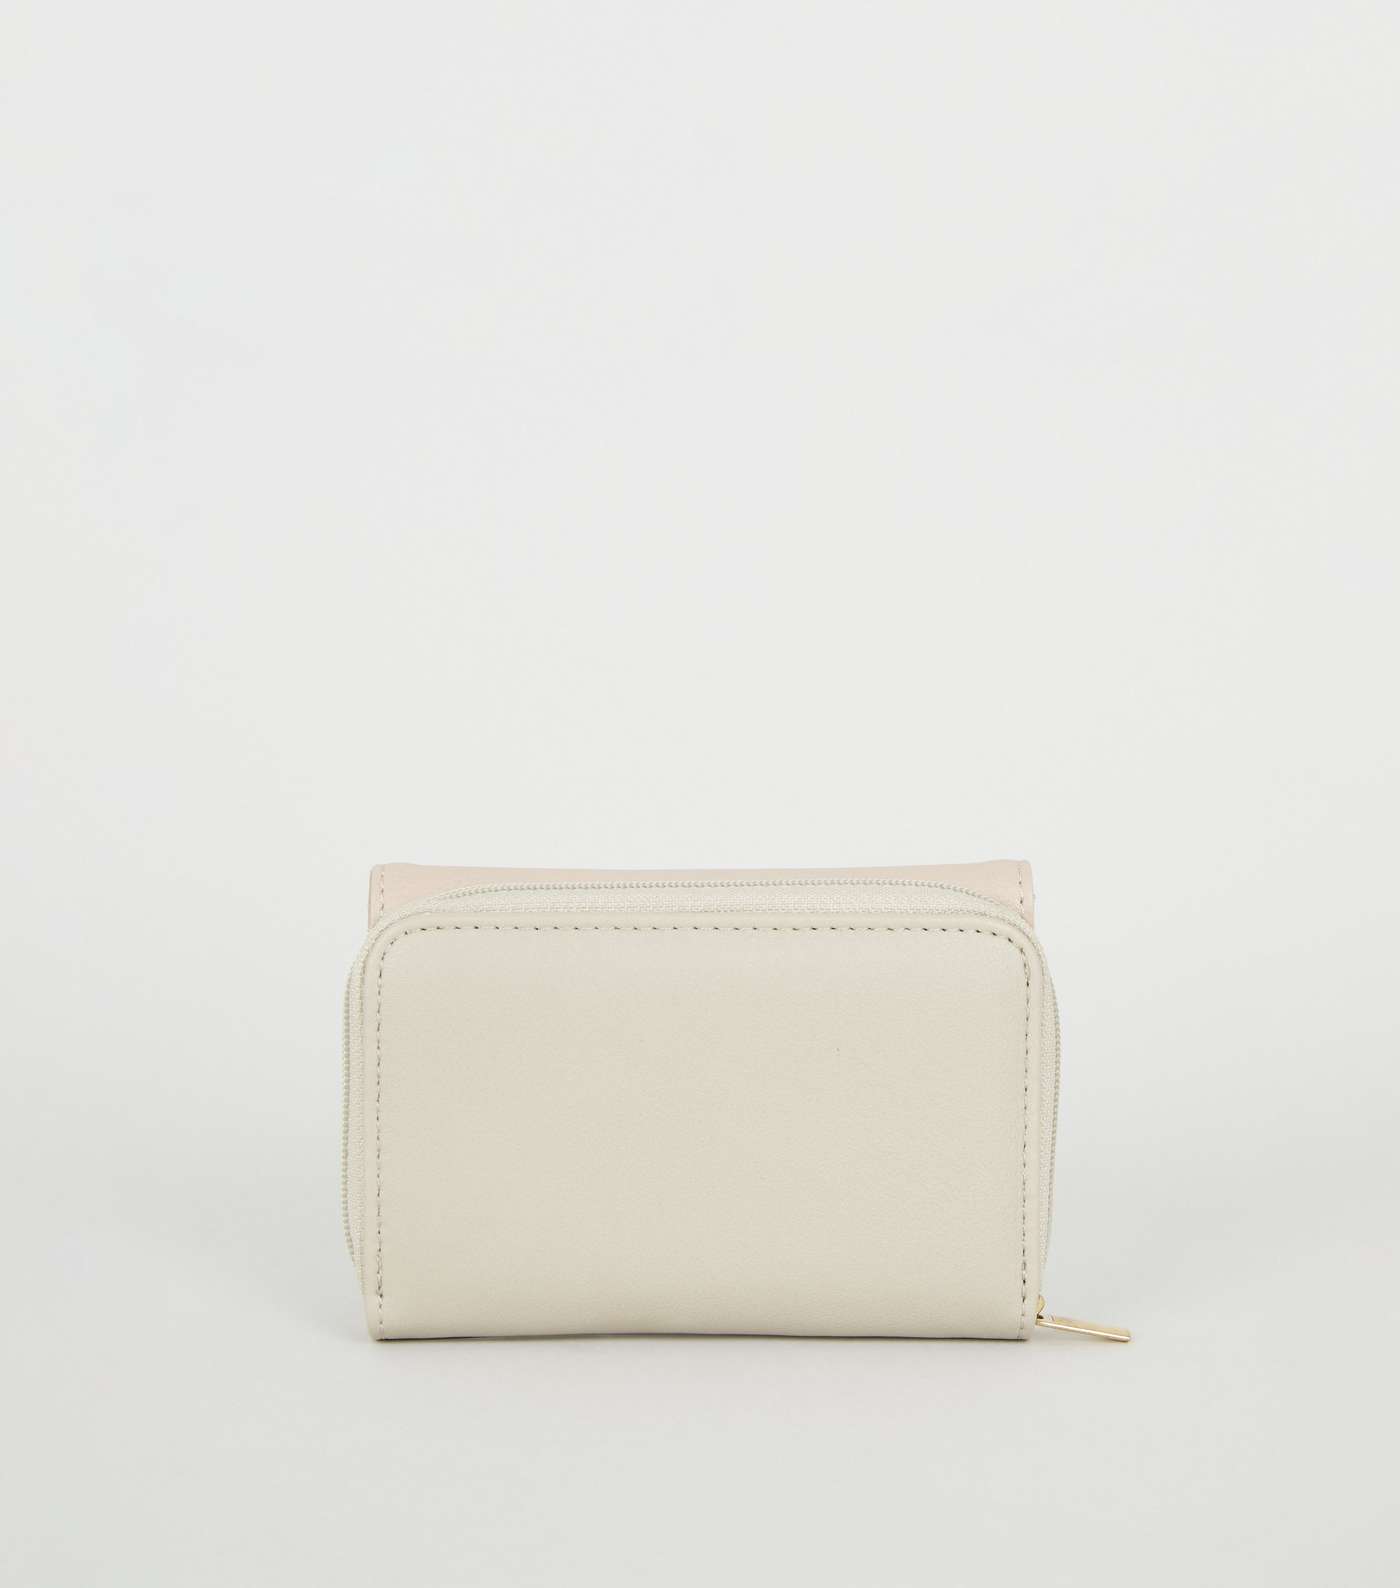 Stone Leather-Look Colour Block Small Purse Image 3